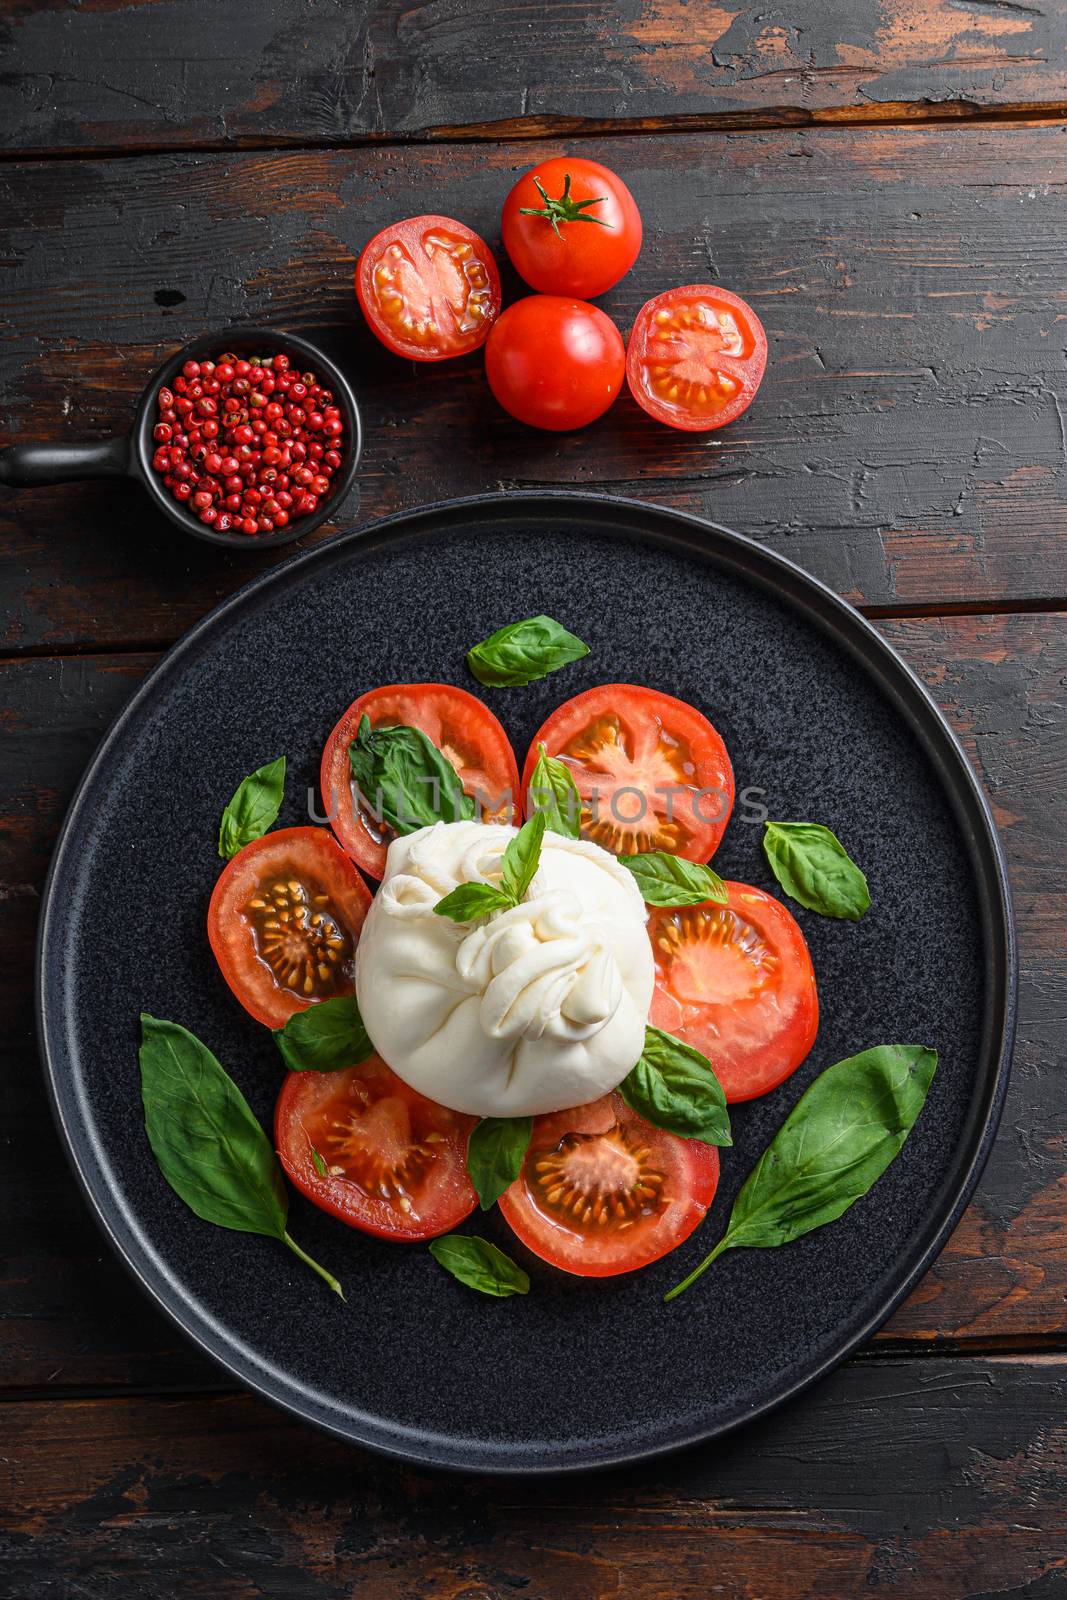 Handmade burrata cheese served with fresh tomatoes and basil leaves traditional italian Salad vertical top view. wood table old rustic. by Ilianesolenyi